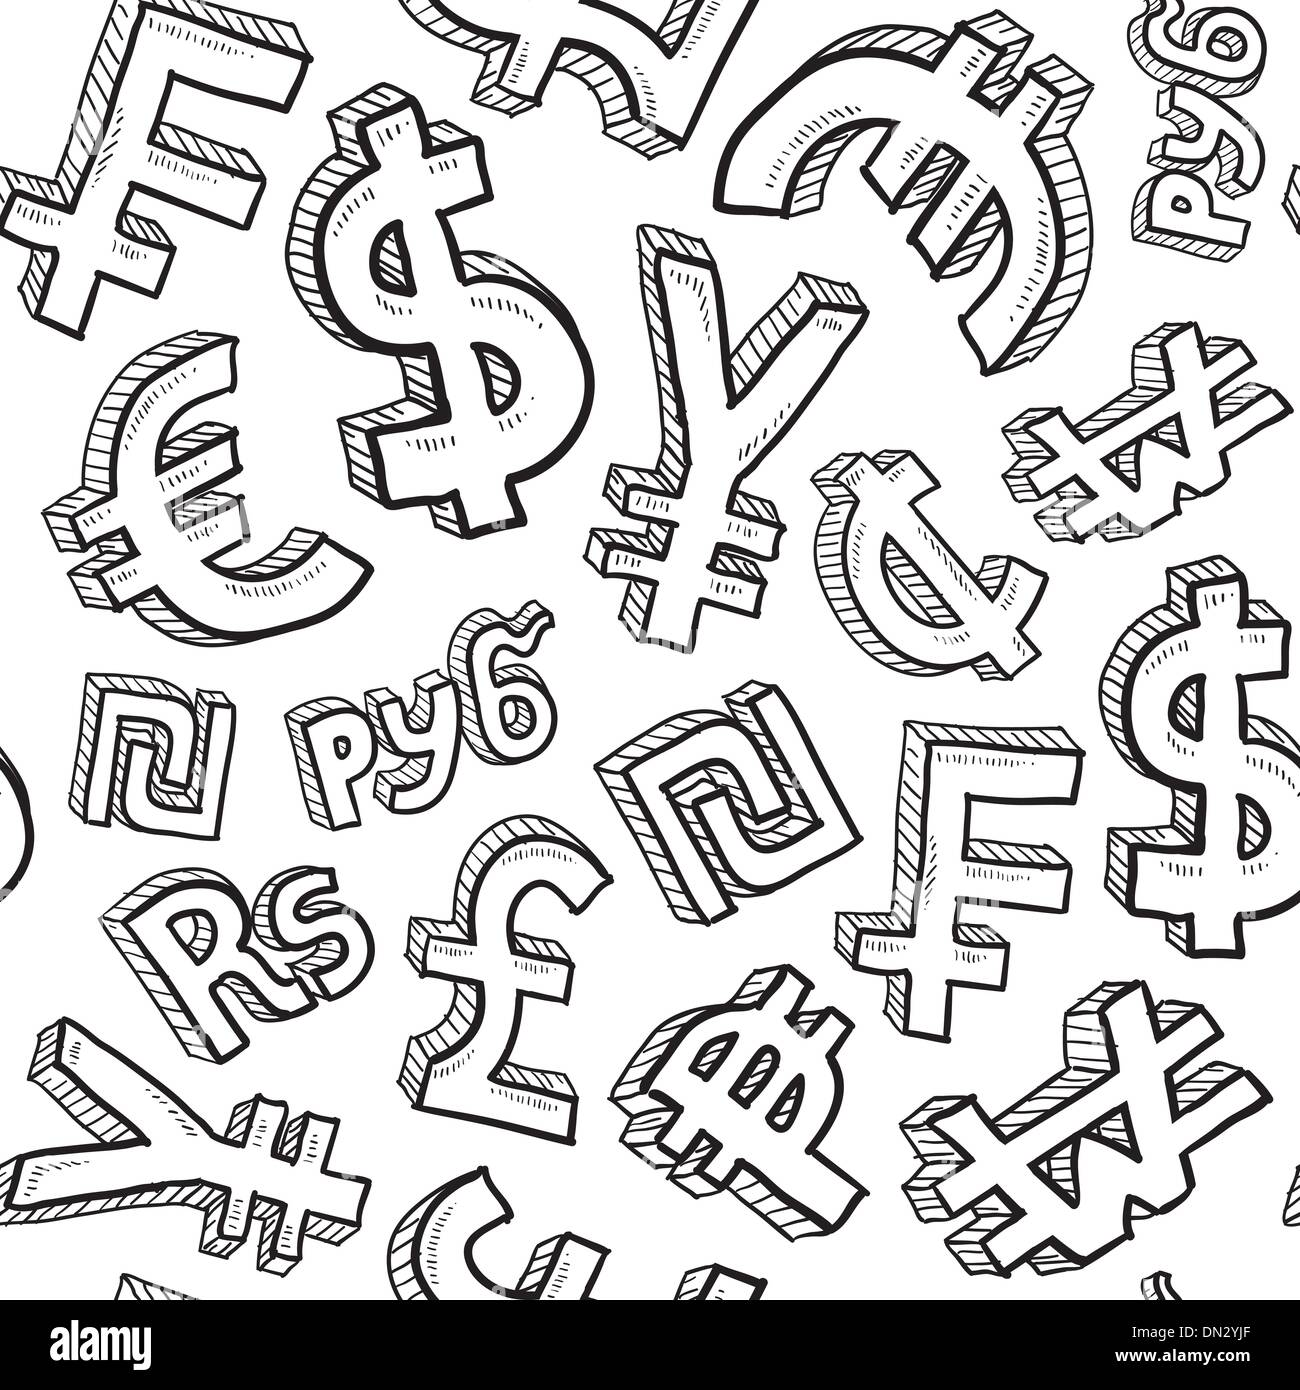 Seamless currency symbol background Stock Vector